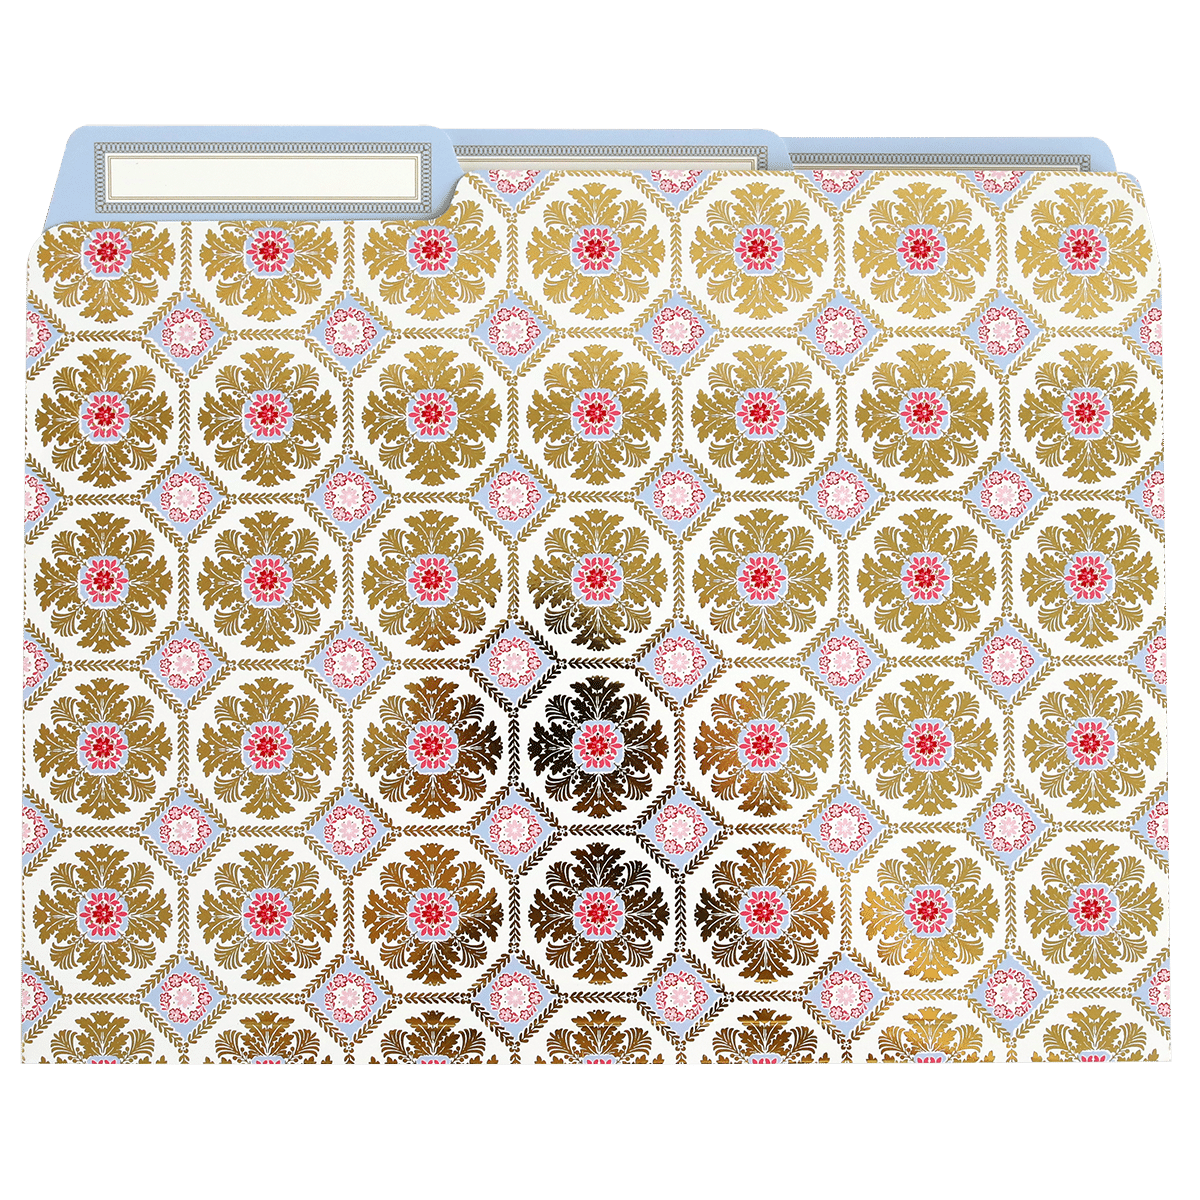 a file folder with a floral pattern on it.